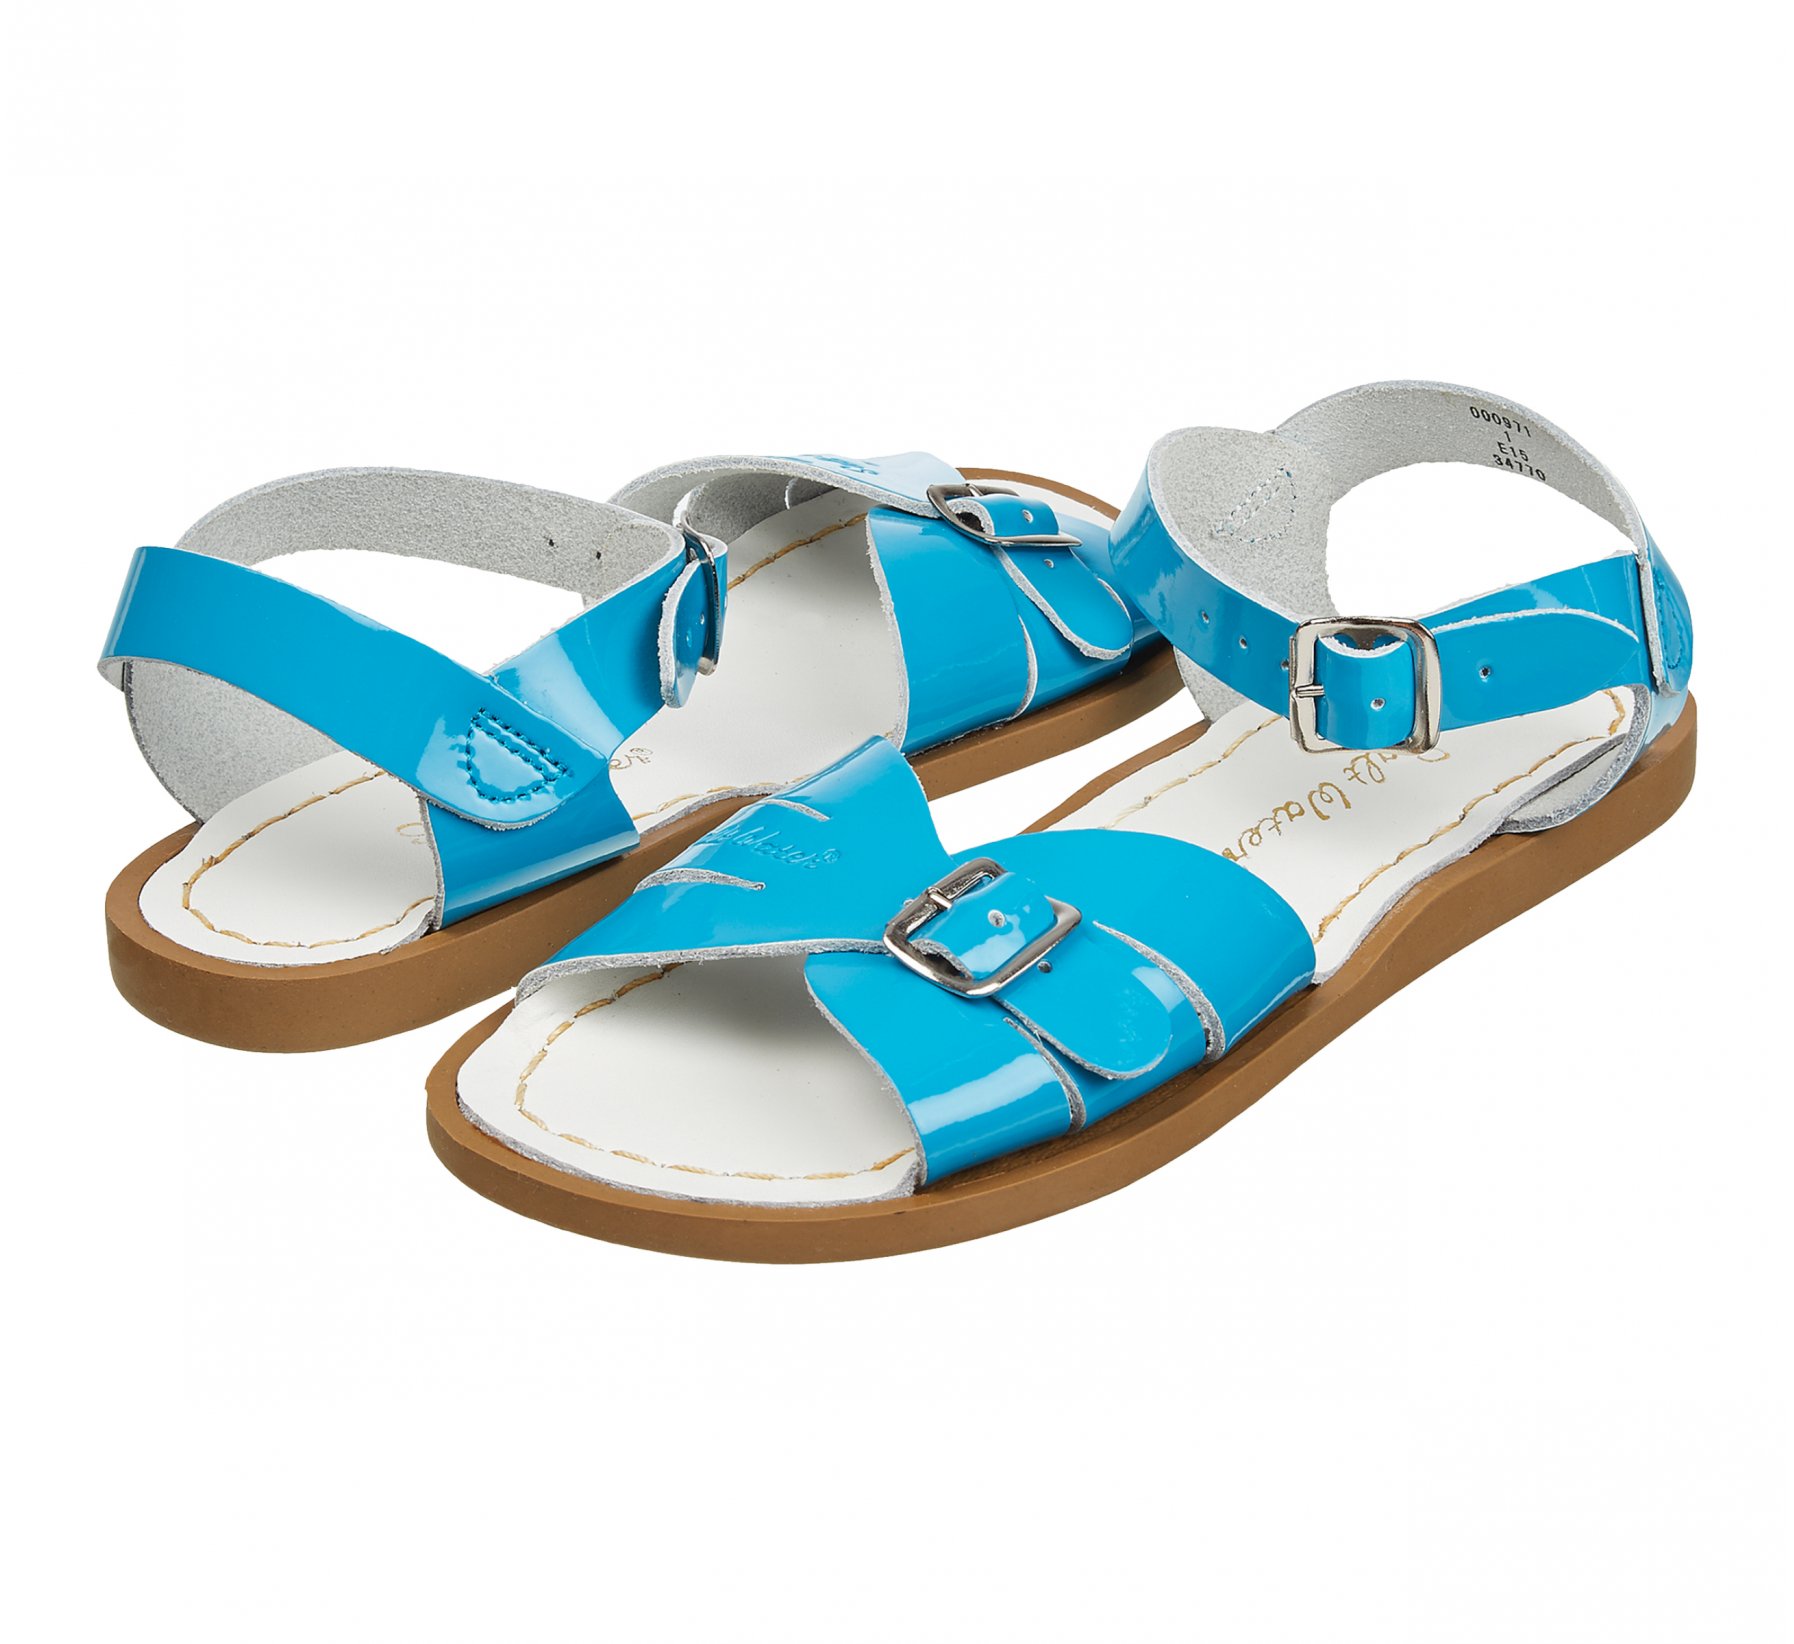 Classic Shiny Turquoise - Salt Water Sandals